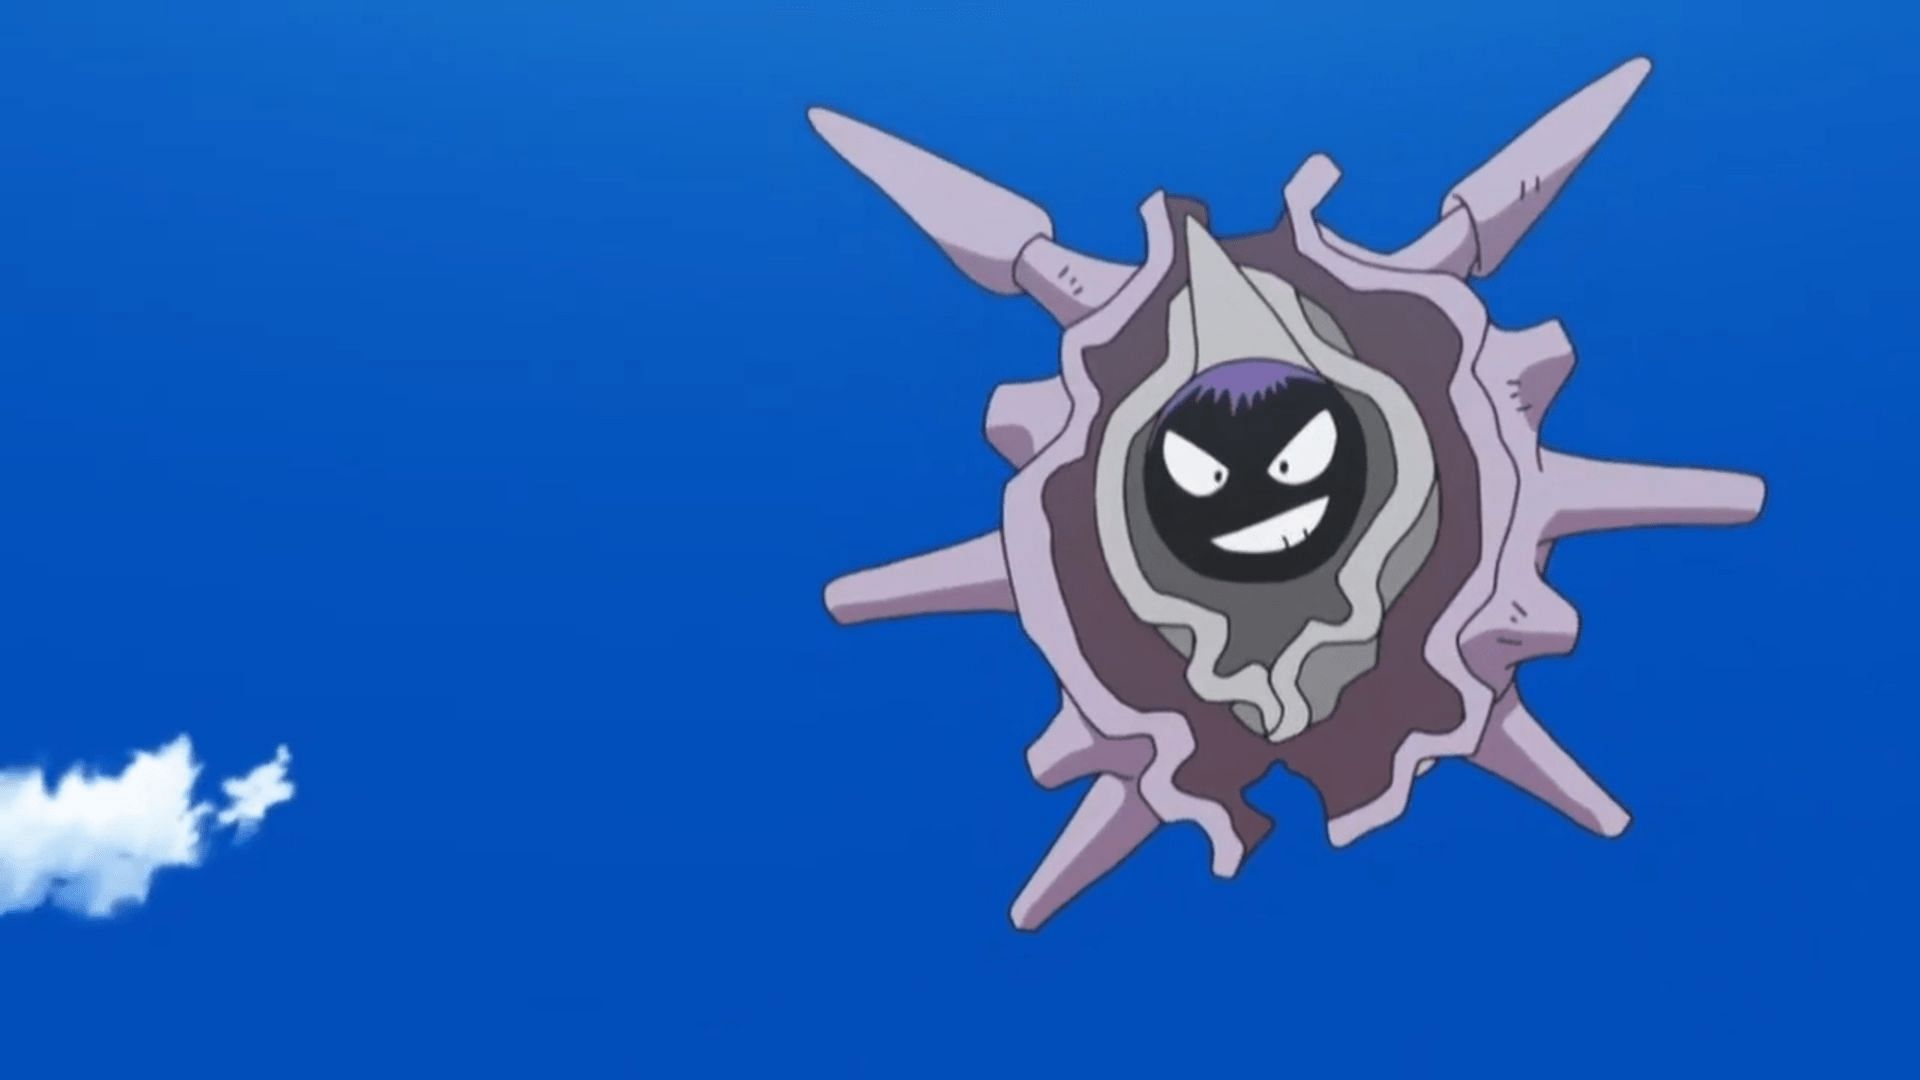 Cloyster as it appears in the anime (Image via The Pokemon Company)